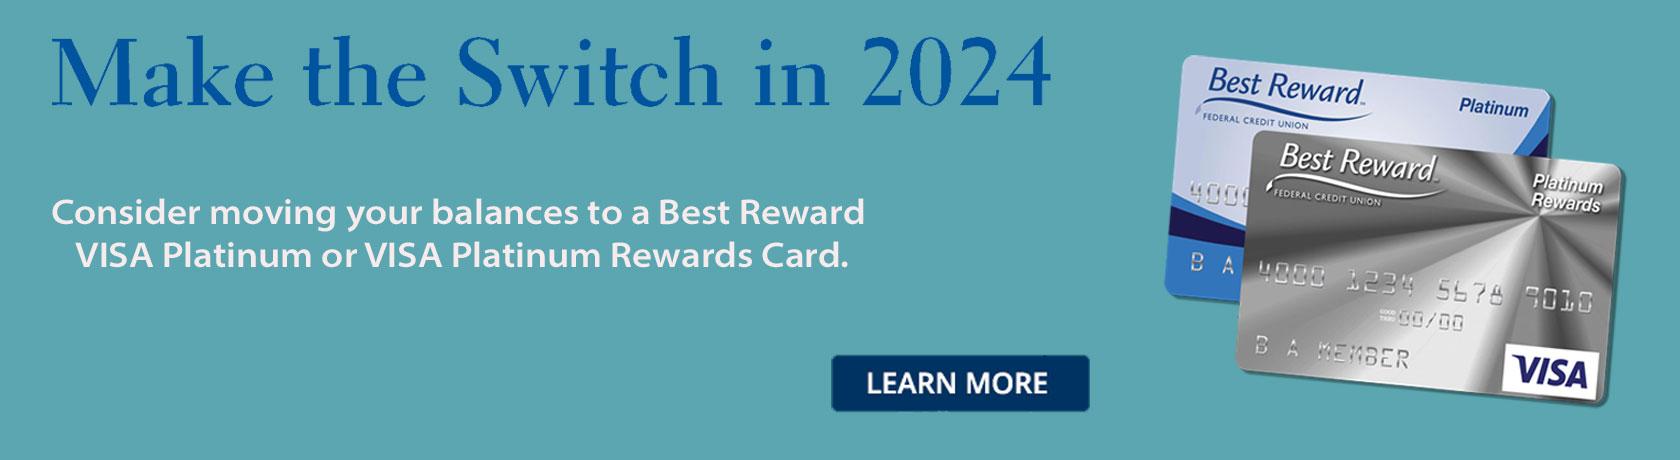 Make the Switch in 2024